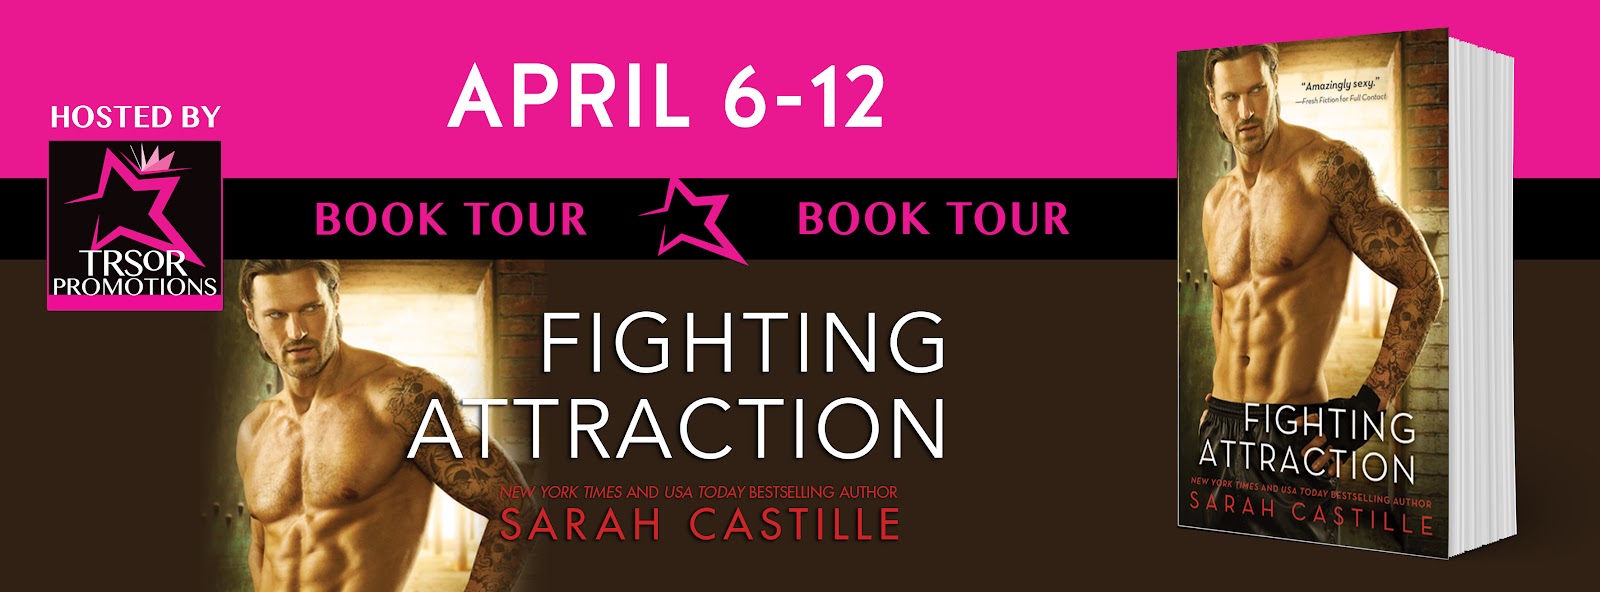 FIGHTING_ATTRACTION_BOOK_TOUR.jpg